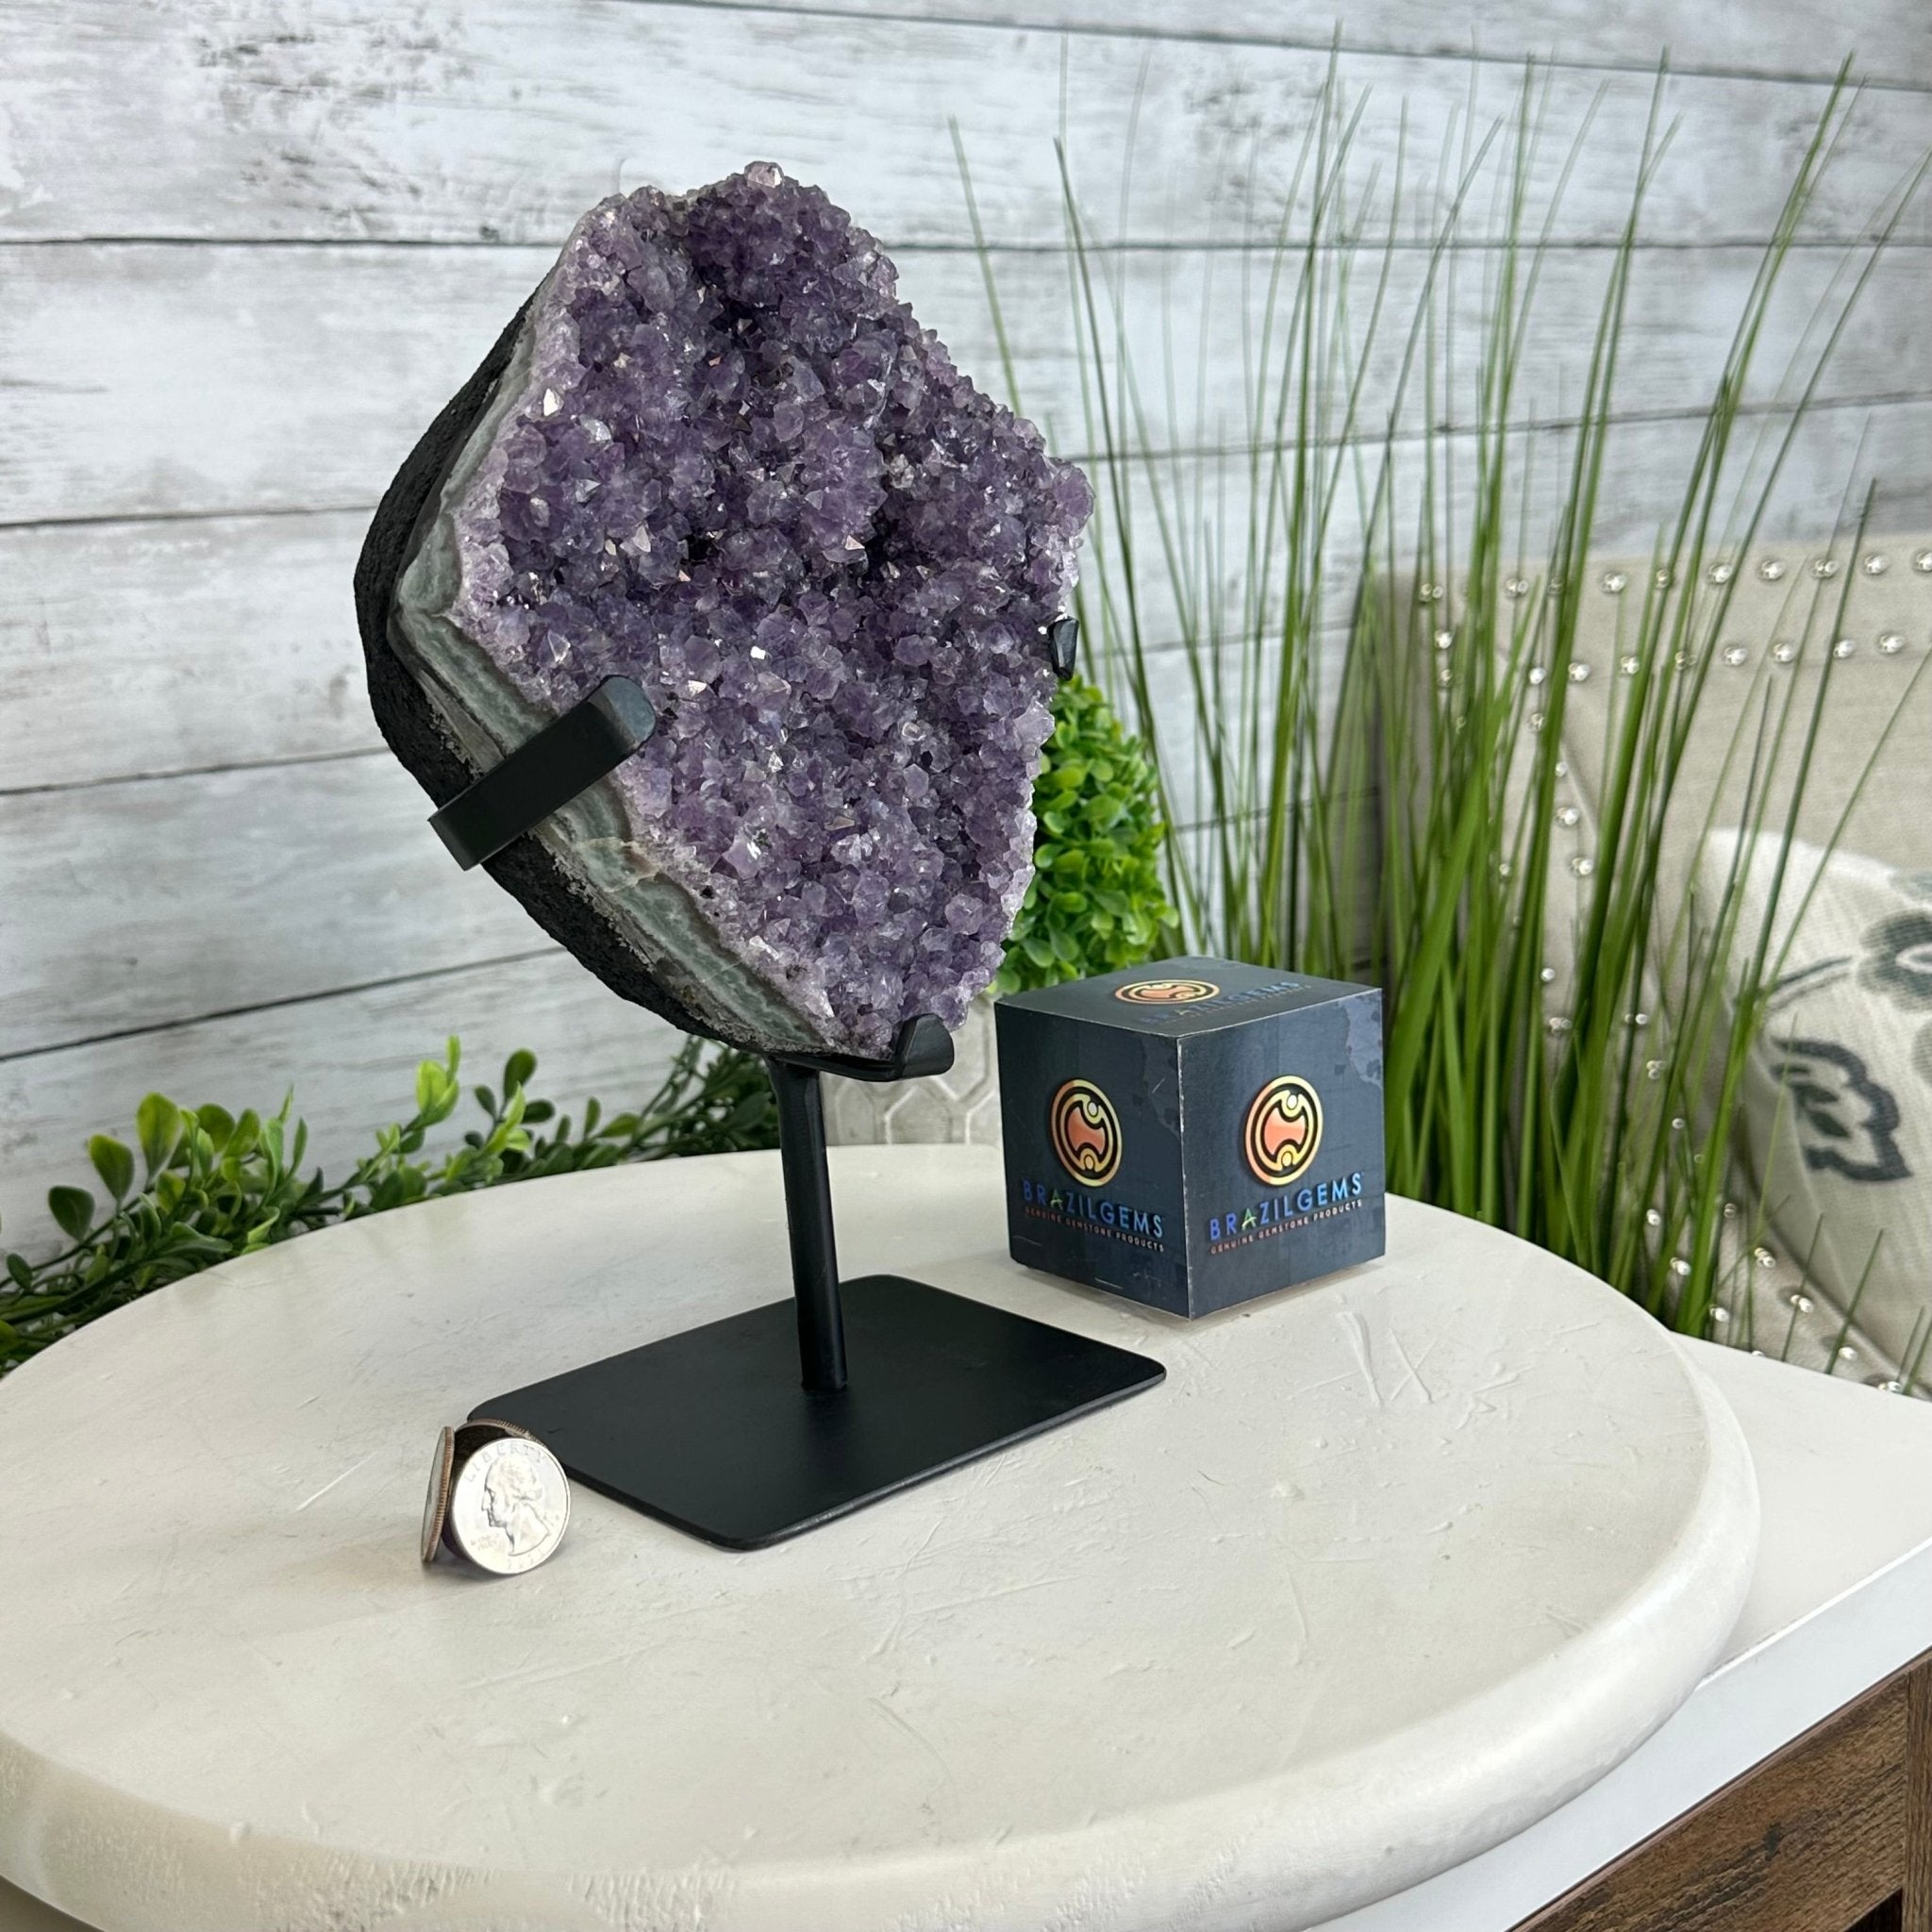 Quality Amethyst Cluster on a Metal Base, 7.2 lbs & 9.75" Tall #5491 - 0055 - Brazil GemsBrazil GemsQuality Amethyst Cluster on a Metal Base, 7.2 lbs & 9.75" Tall #5491 - 0055Clusters on Fixed Bases5491 - 0055